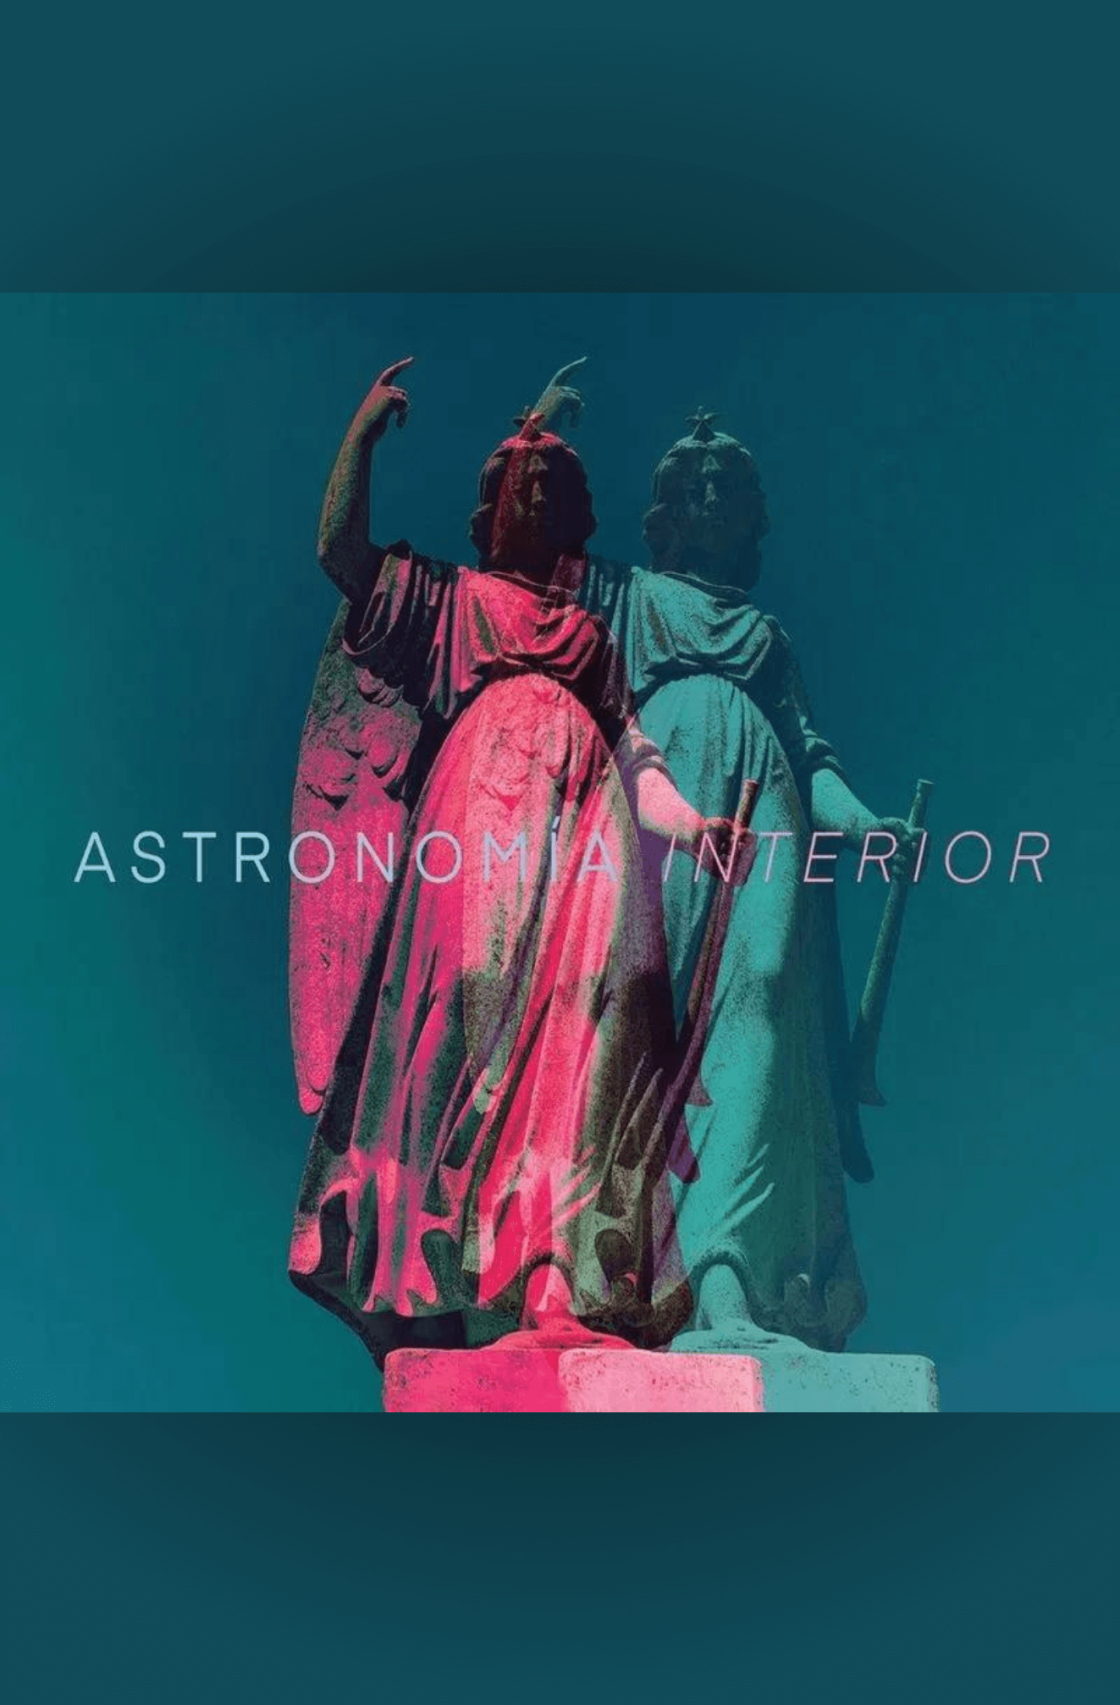 Astronomia interior – Musical Artist uses augmented reality